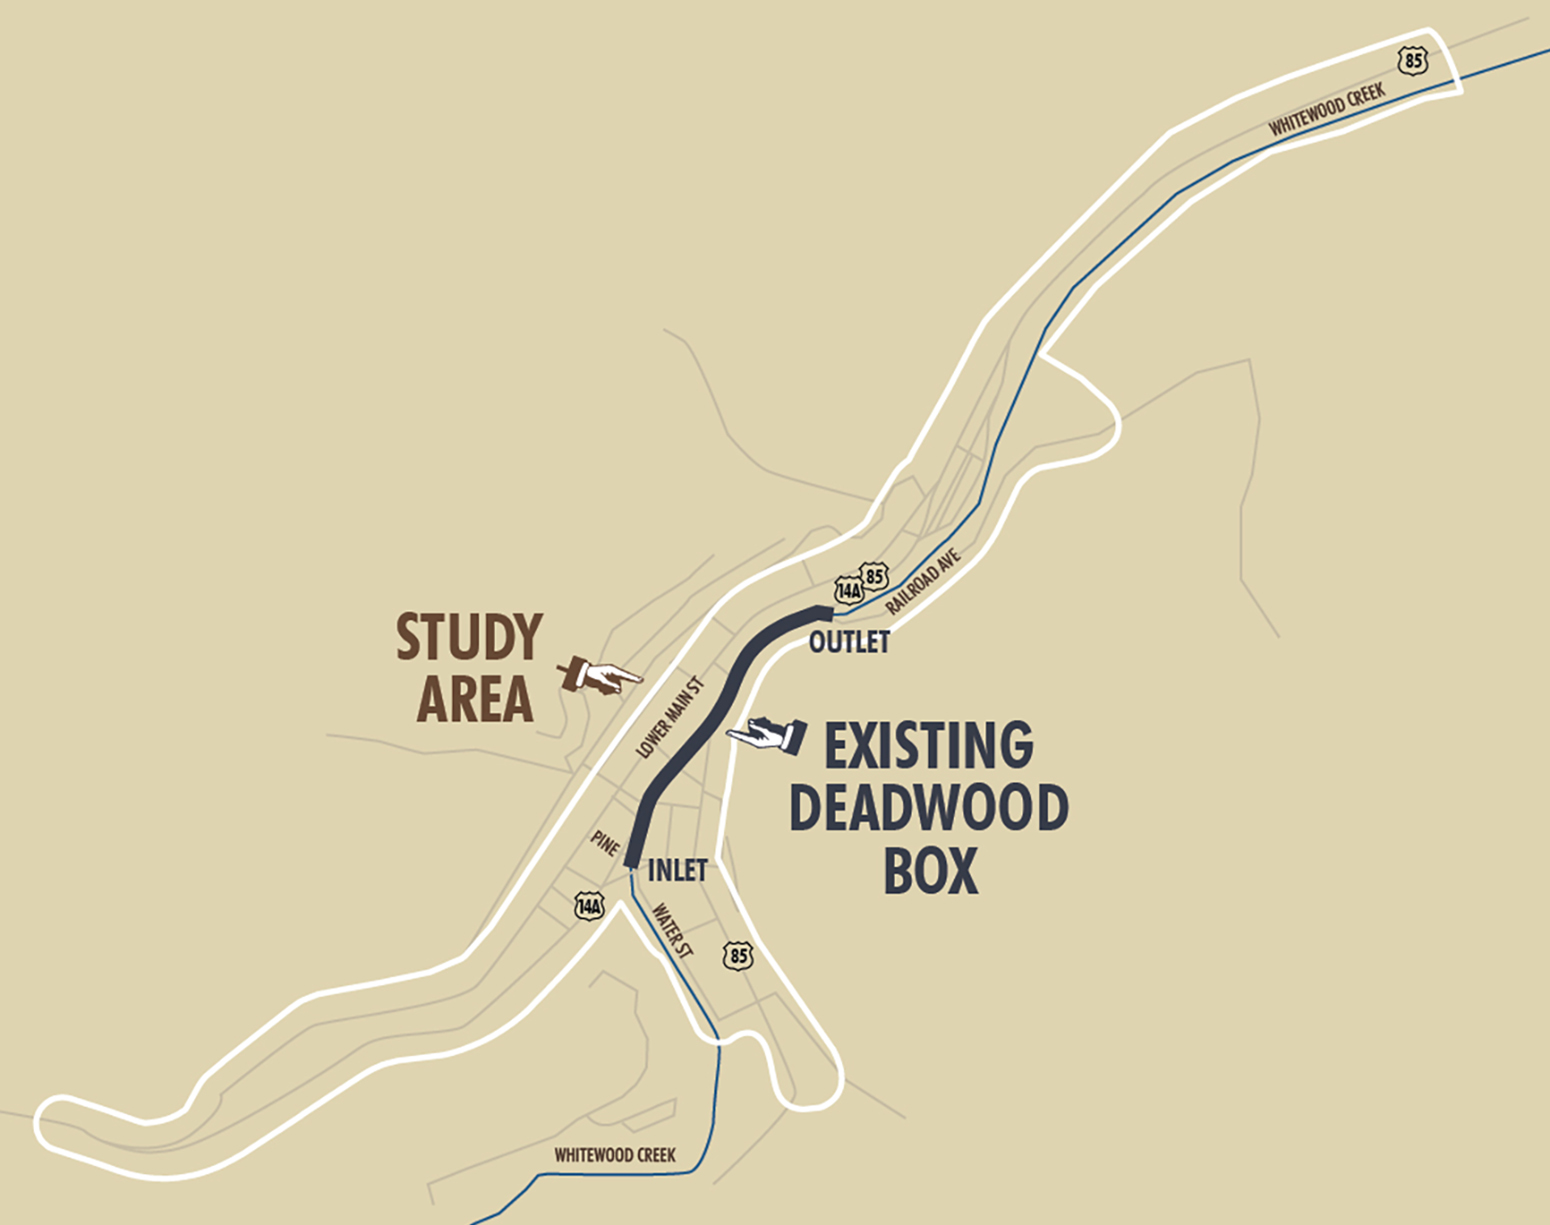 Map showing the study area and current Deadwood box